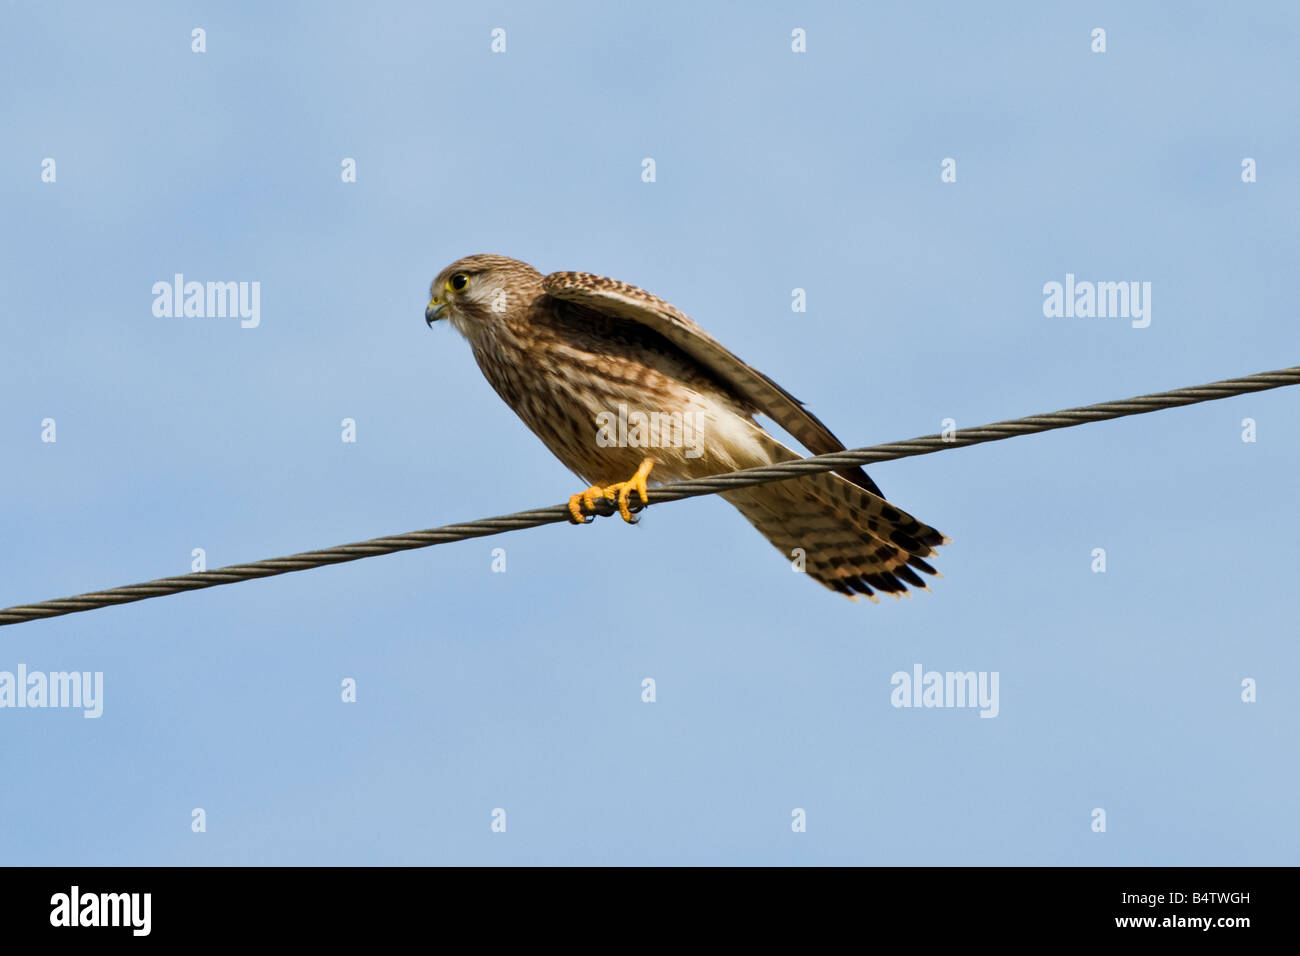 A colour photograph of a female kestrel sitting on a power cable (004 ...